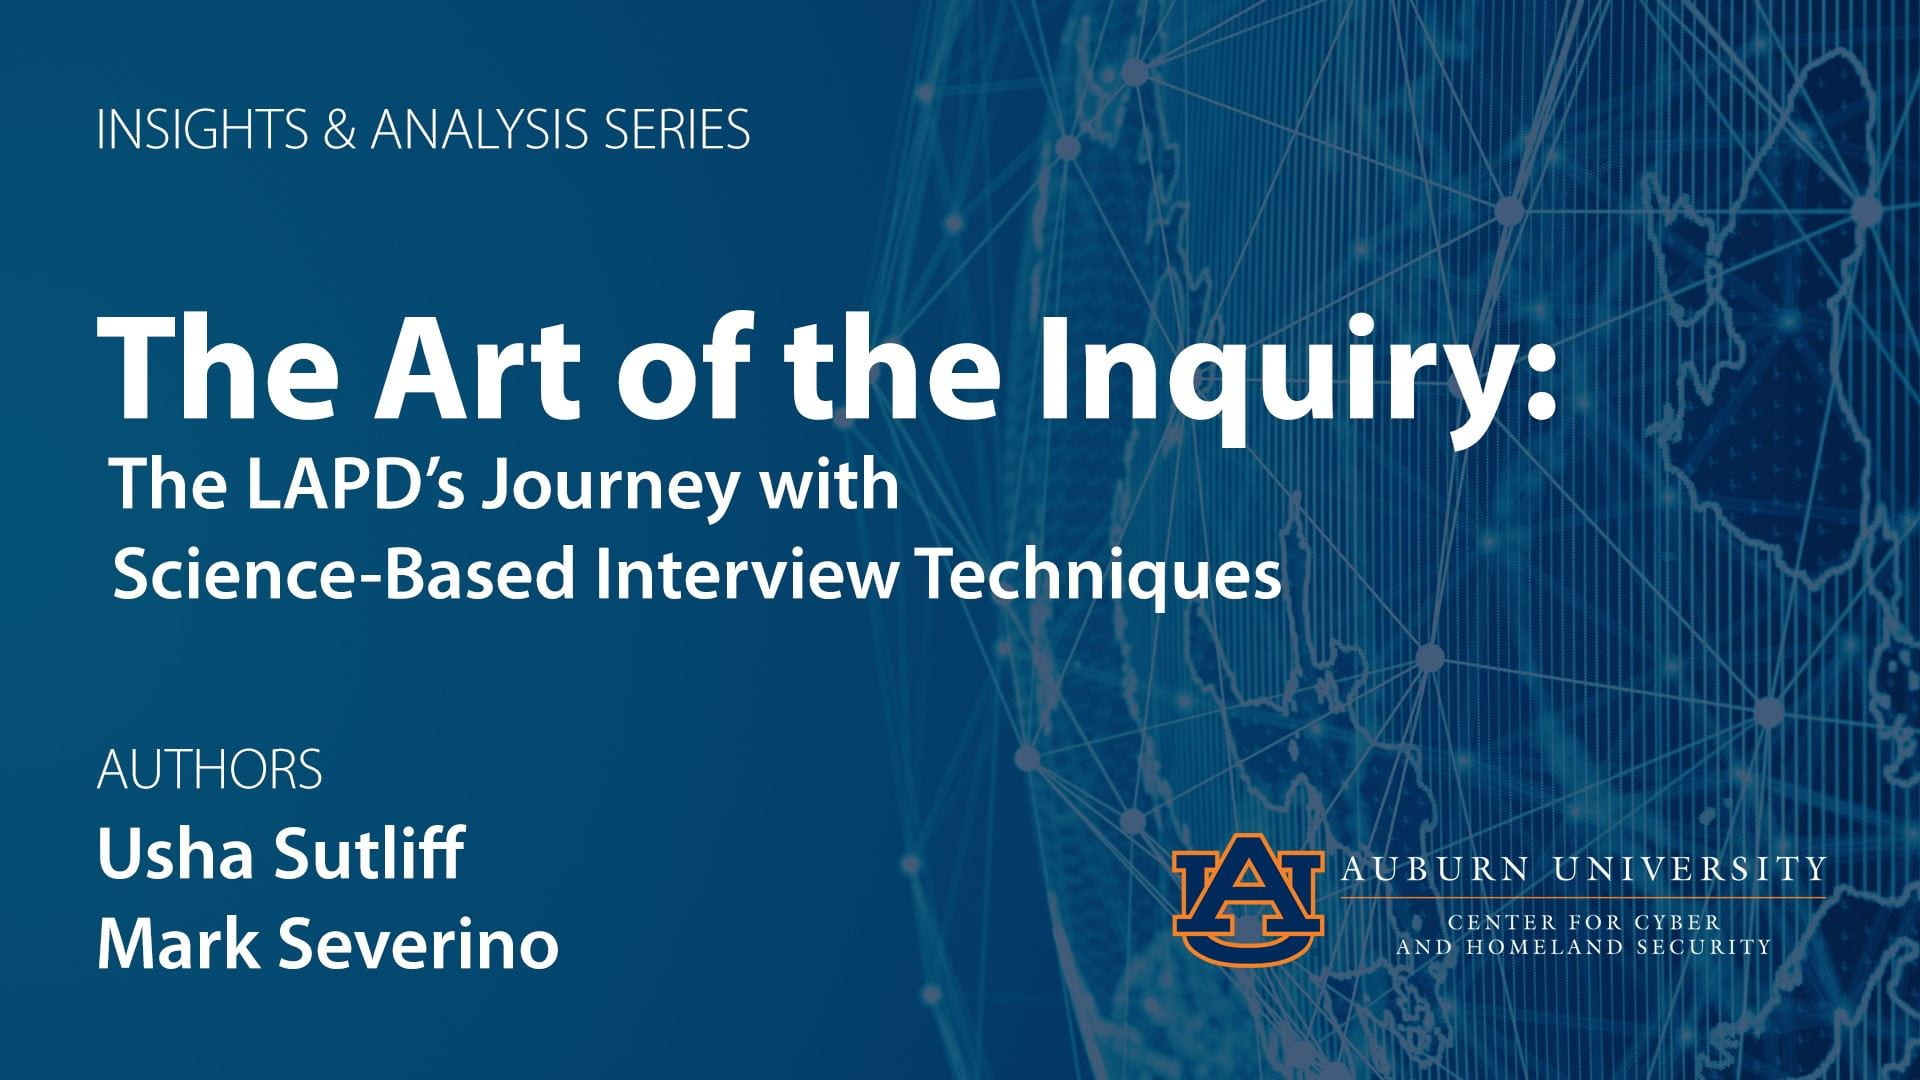 The Art of the Inquiry: The LAPD’s Journey with Science-Based Interview Techniques